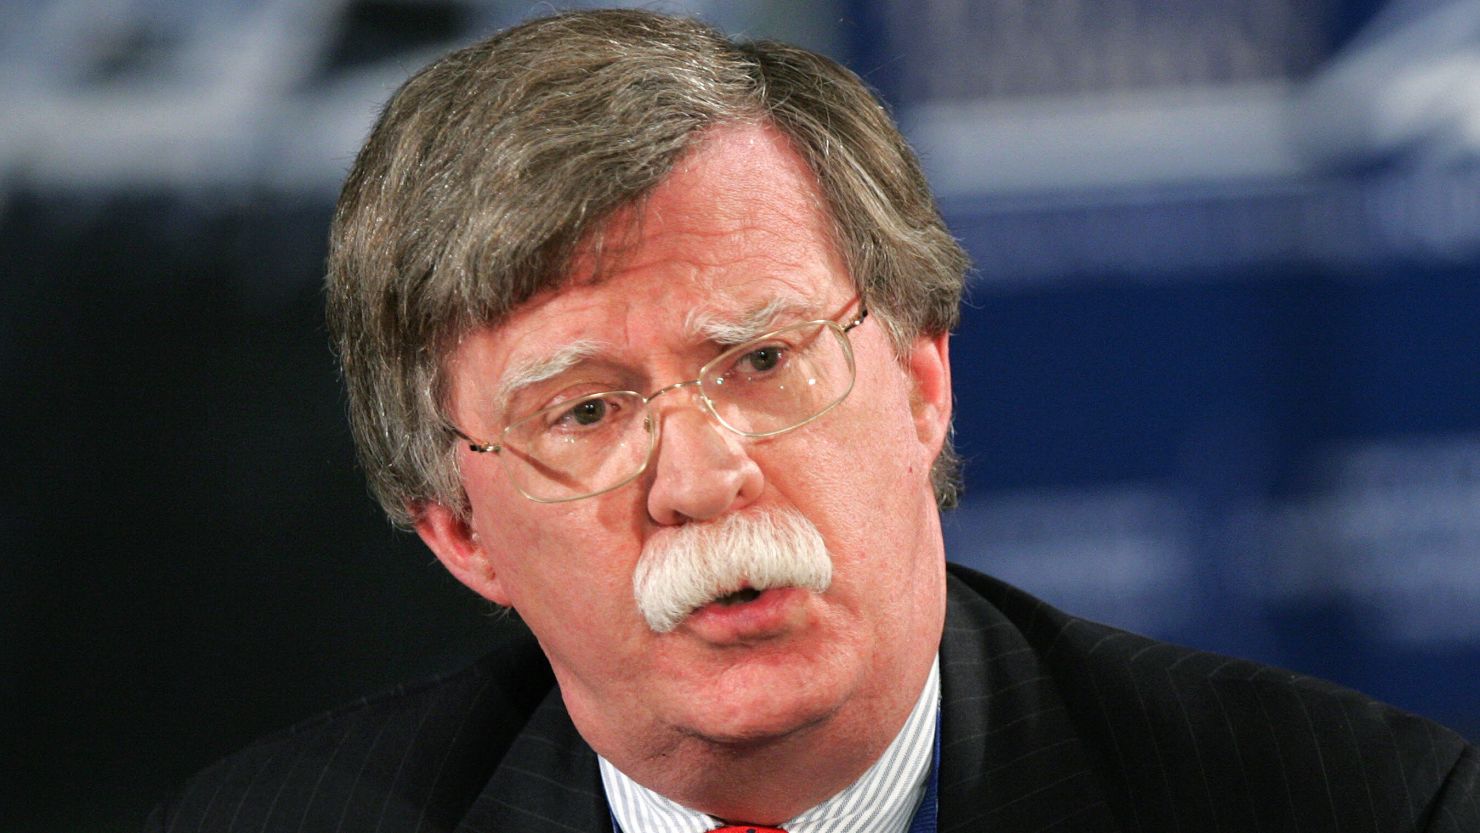 John Bolton, former U.S. ambassador to the United Nations,  as pictured in January 2008